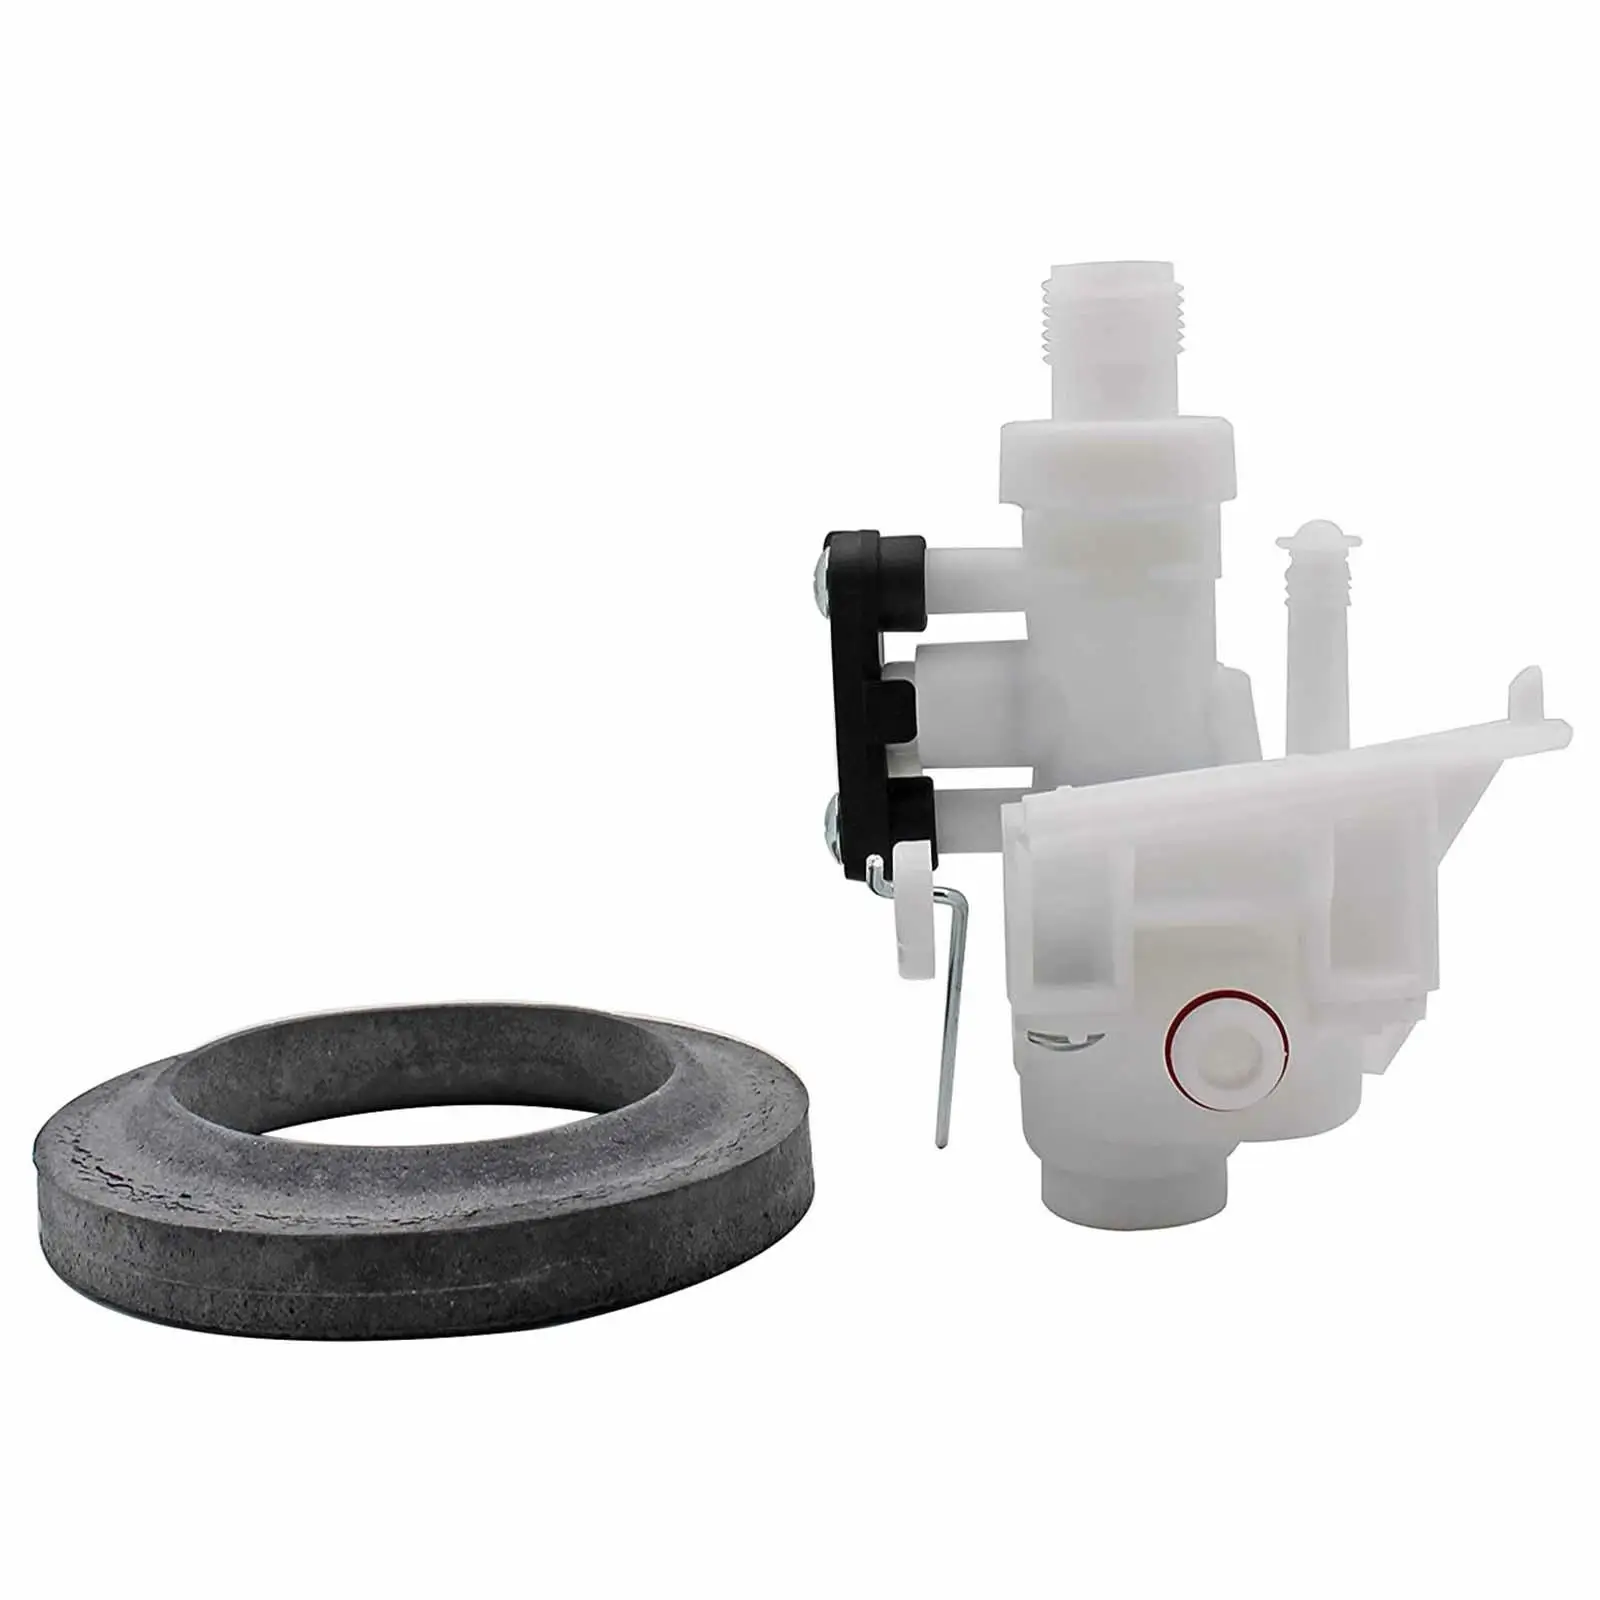 31705 RV Water Valve Practical Convenient Professional Toilet Water Module Assembly for Motor Home RV Replace Parts Accessories